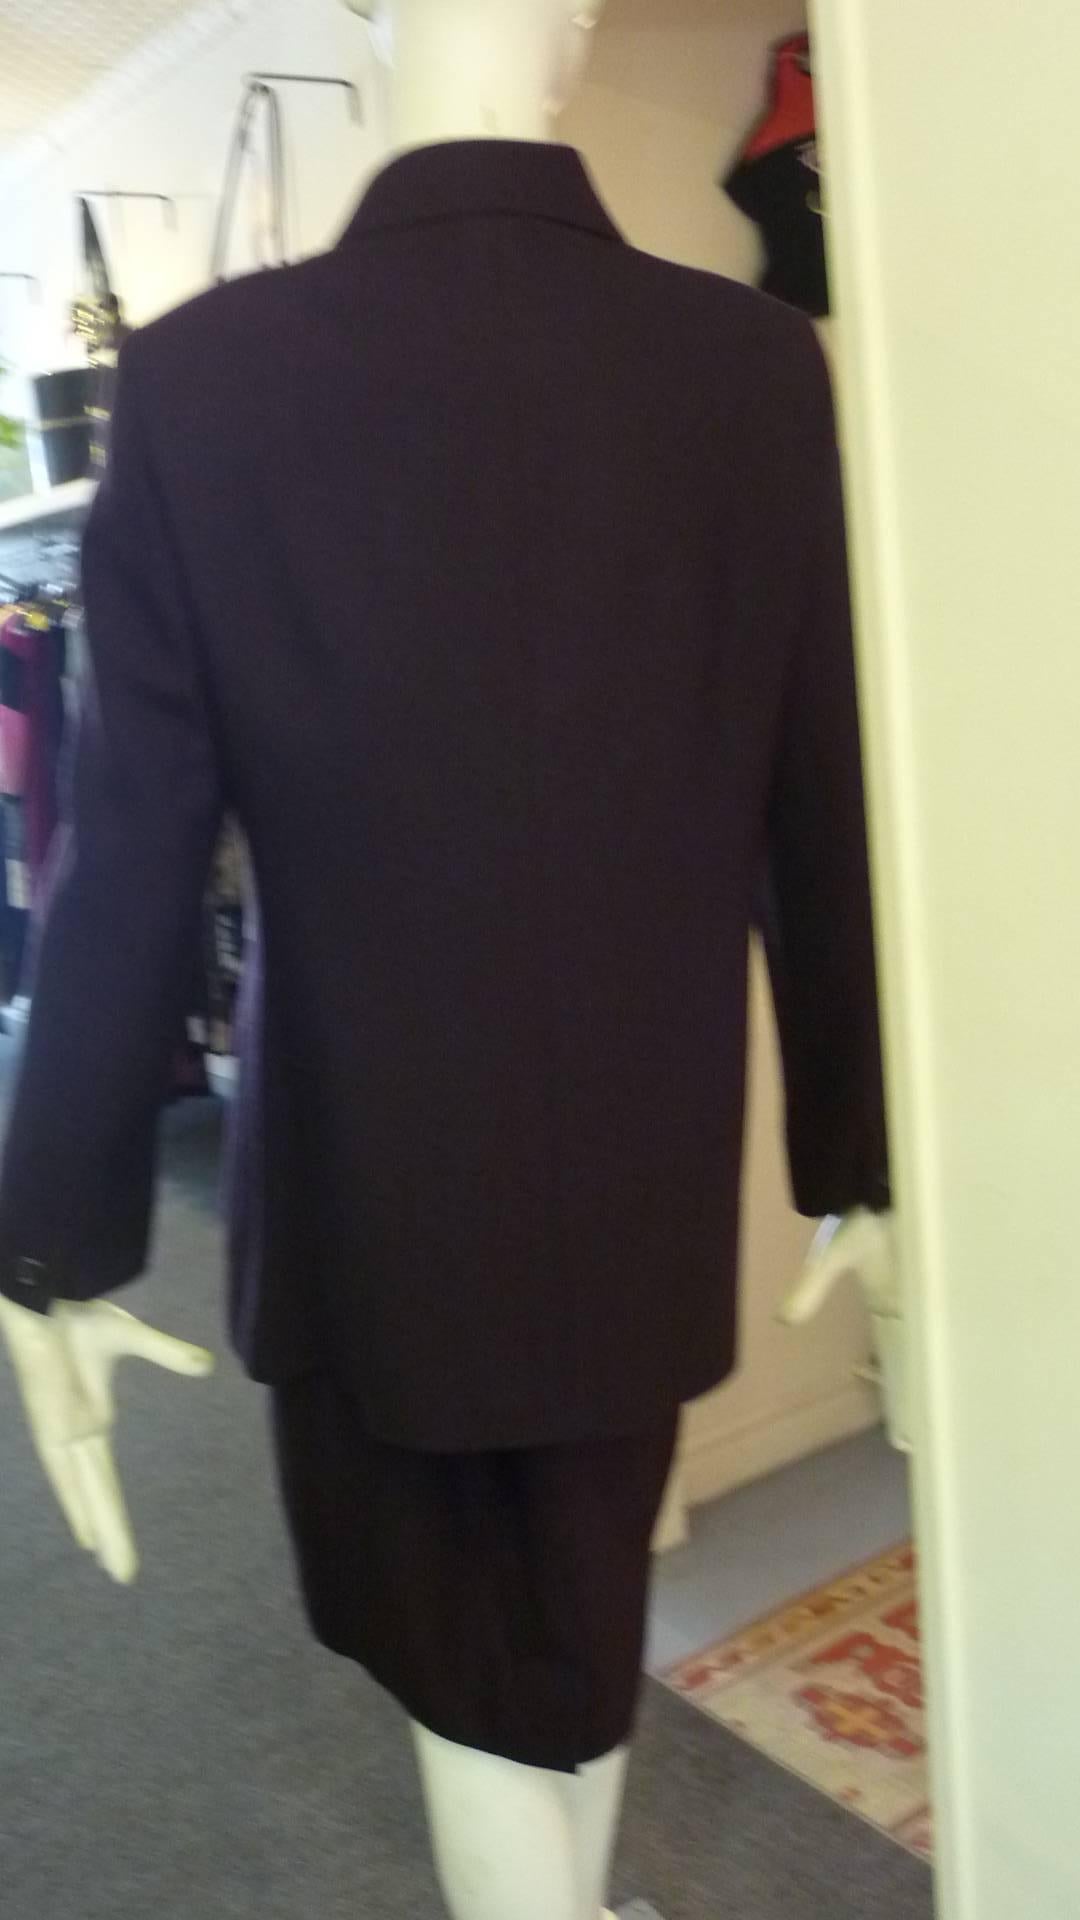 This suit is in wonderful condition with a long jacket which can easily be worn on its own,

There are two breast pockets and two hip level pockets. Closure is by five front buttons, and there is a button on each cuff.

As with all A.K.R.I.S